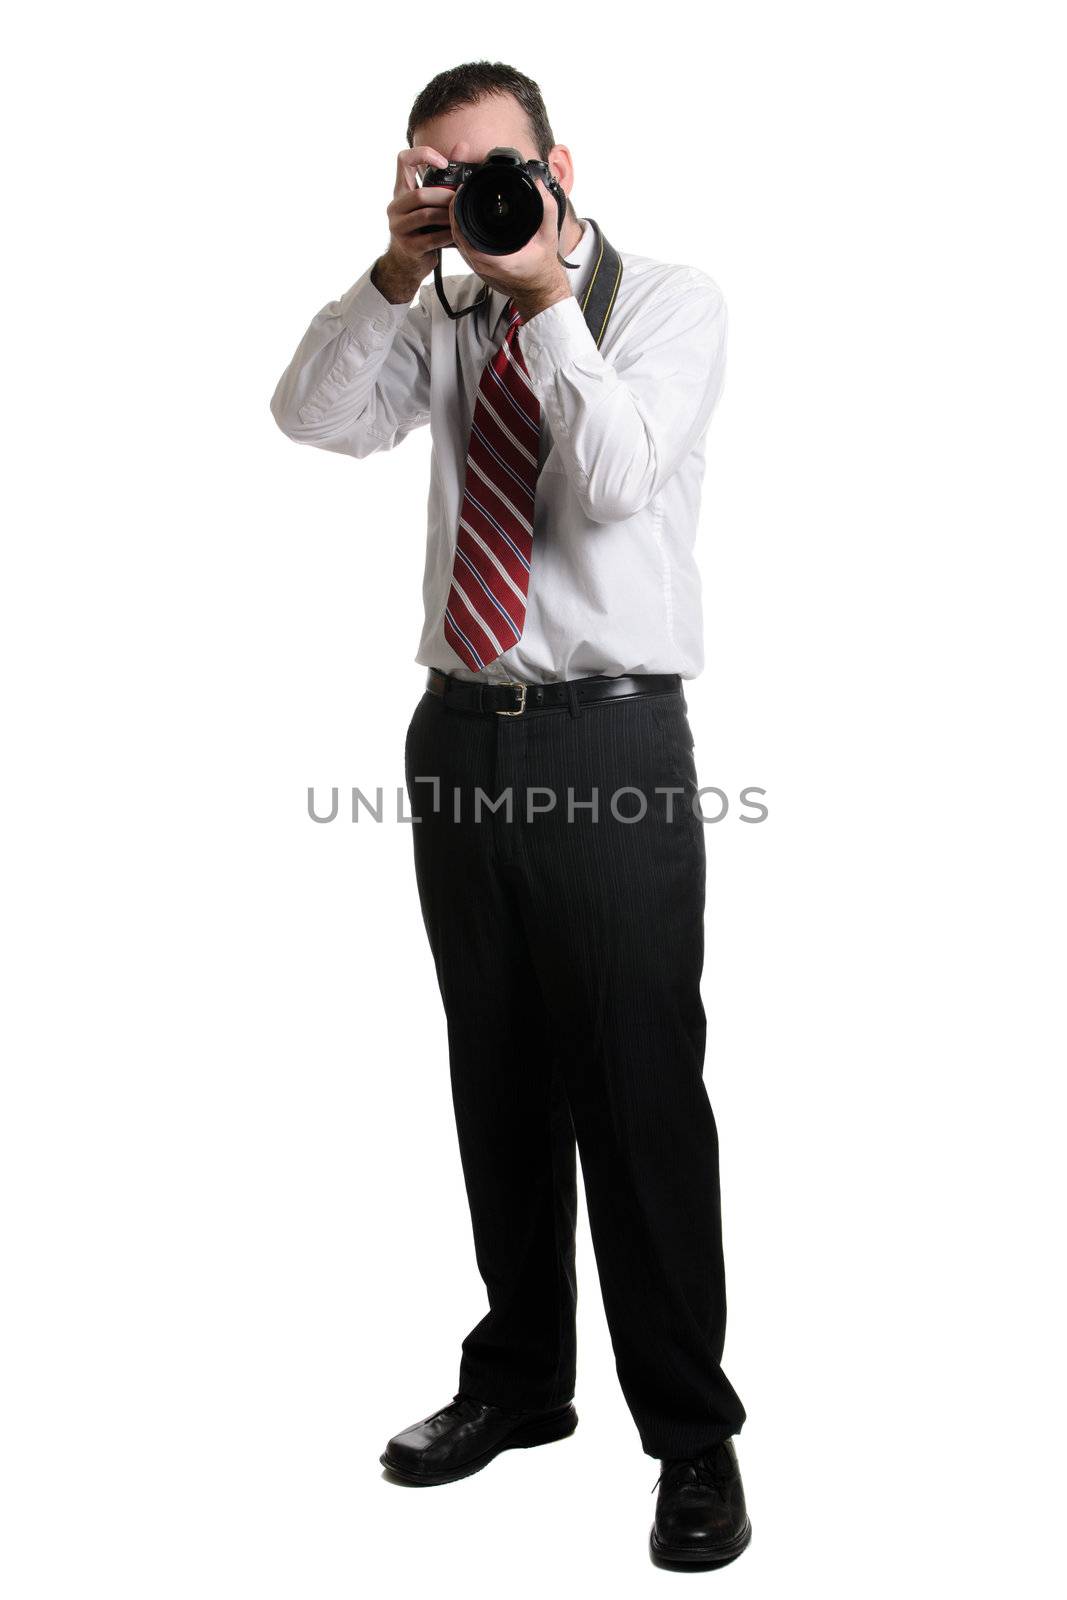 A full length view of a photographer using a DSLR, isolated against a white background.